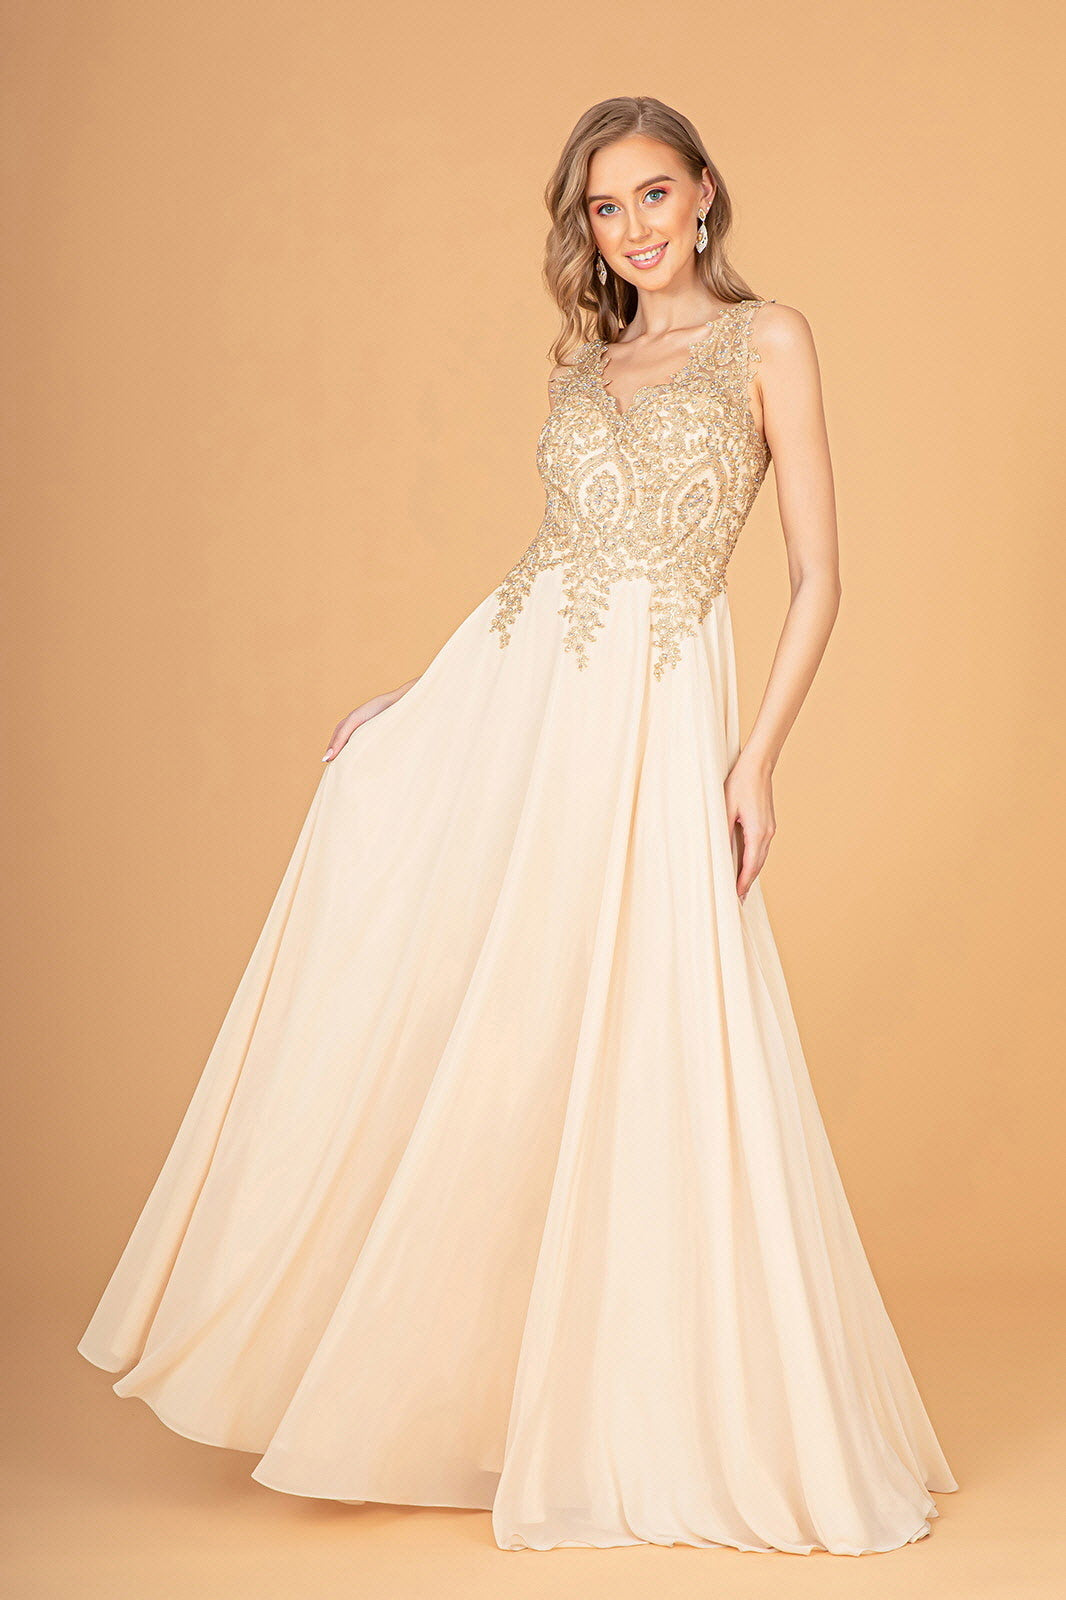 Embroidered Chiffon Long Prom Dress Formal - The Dress Outlet Champagne